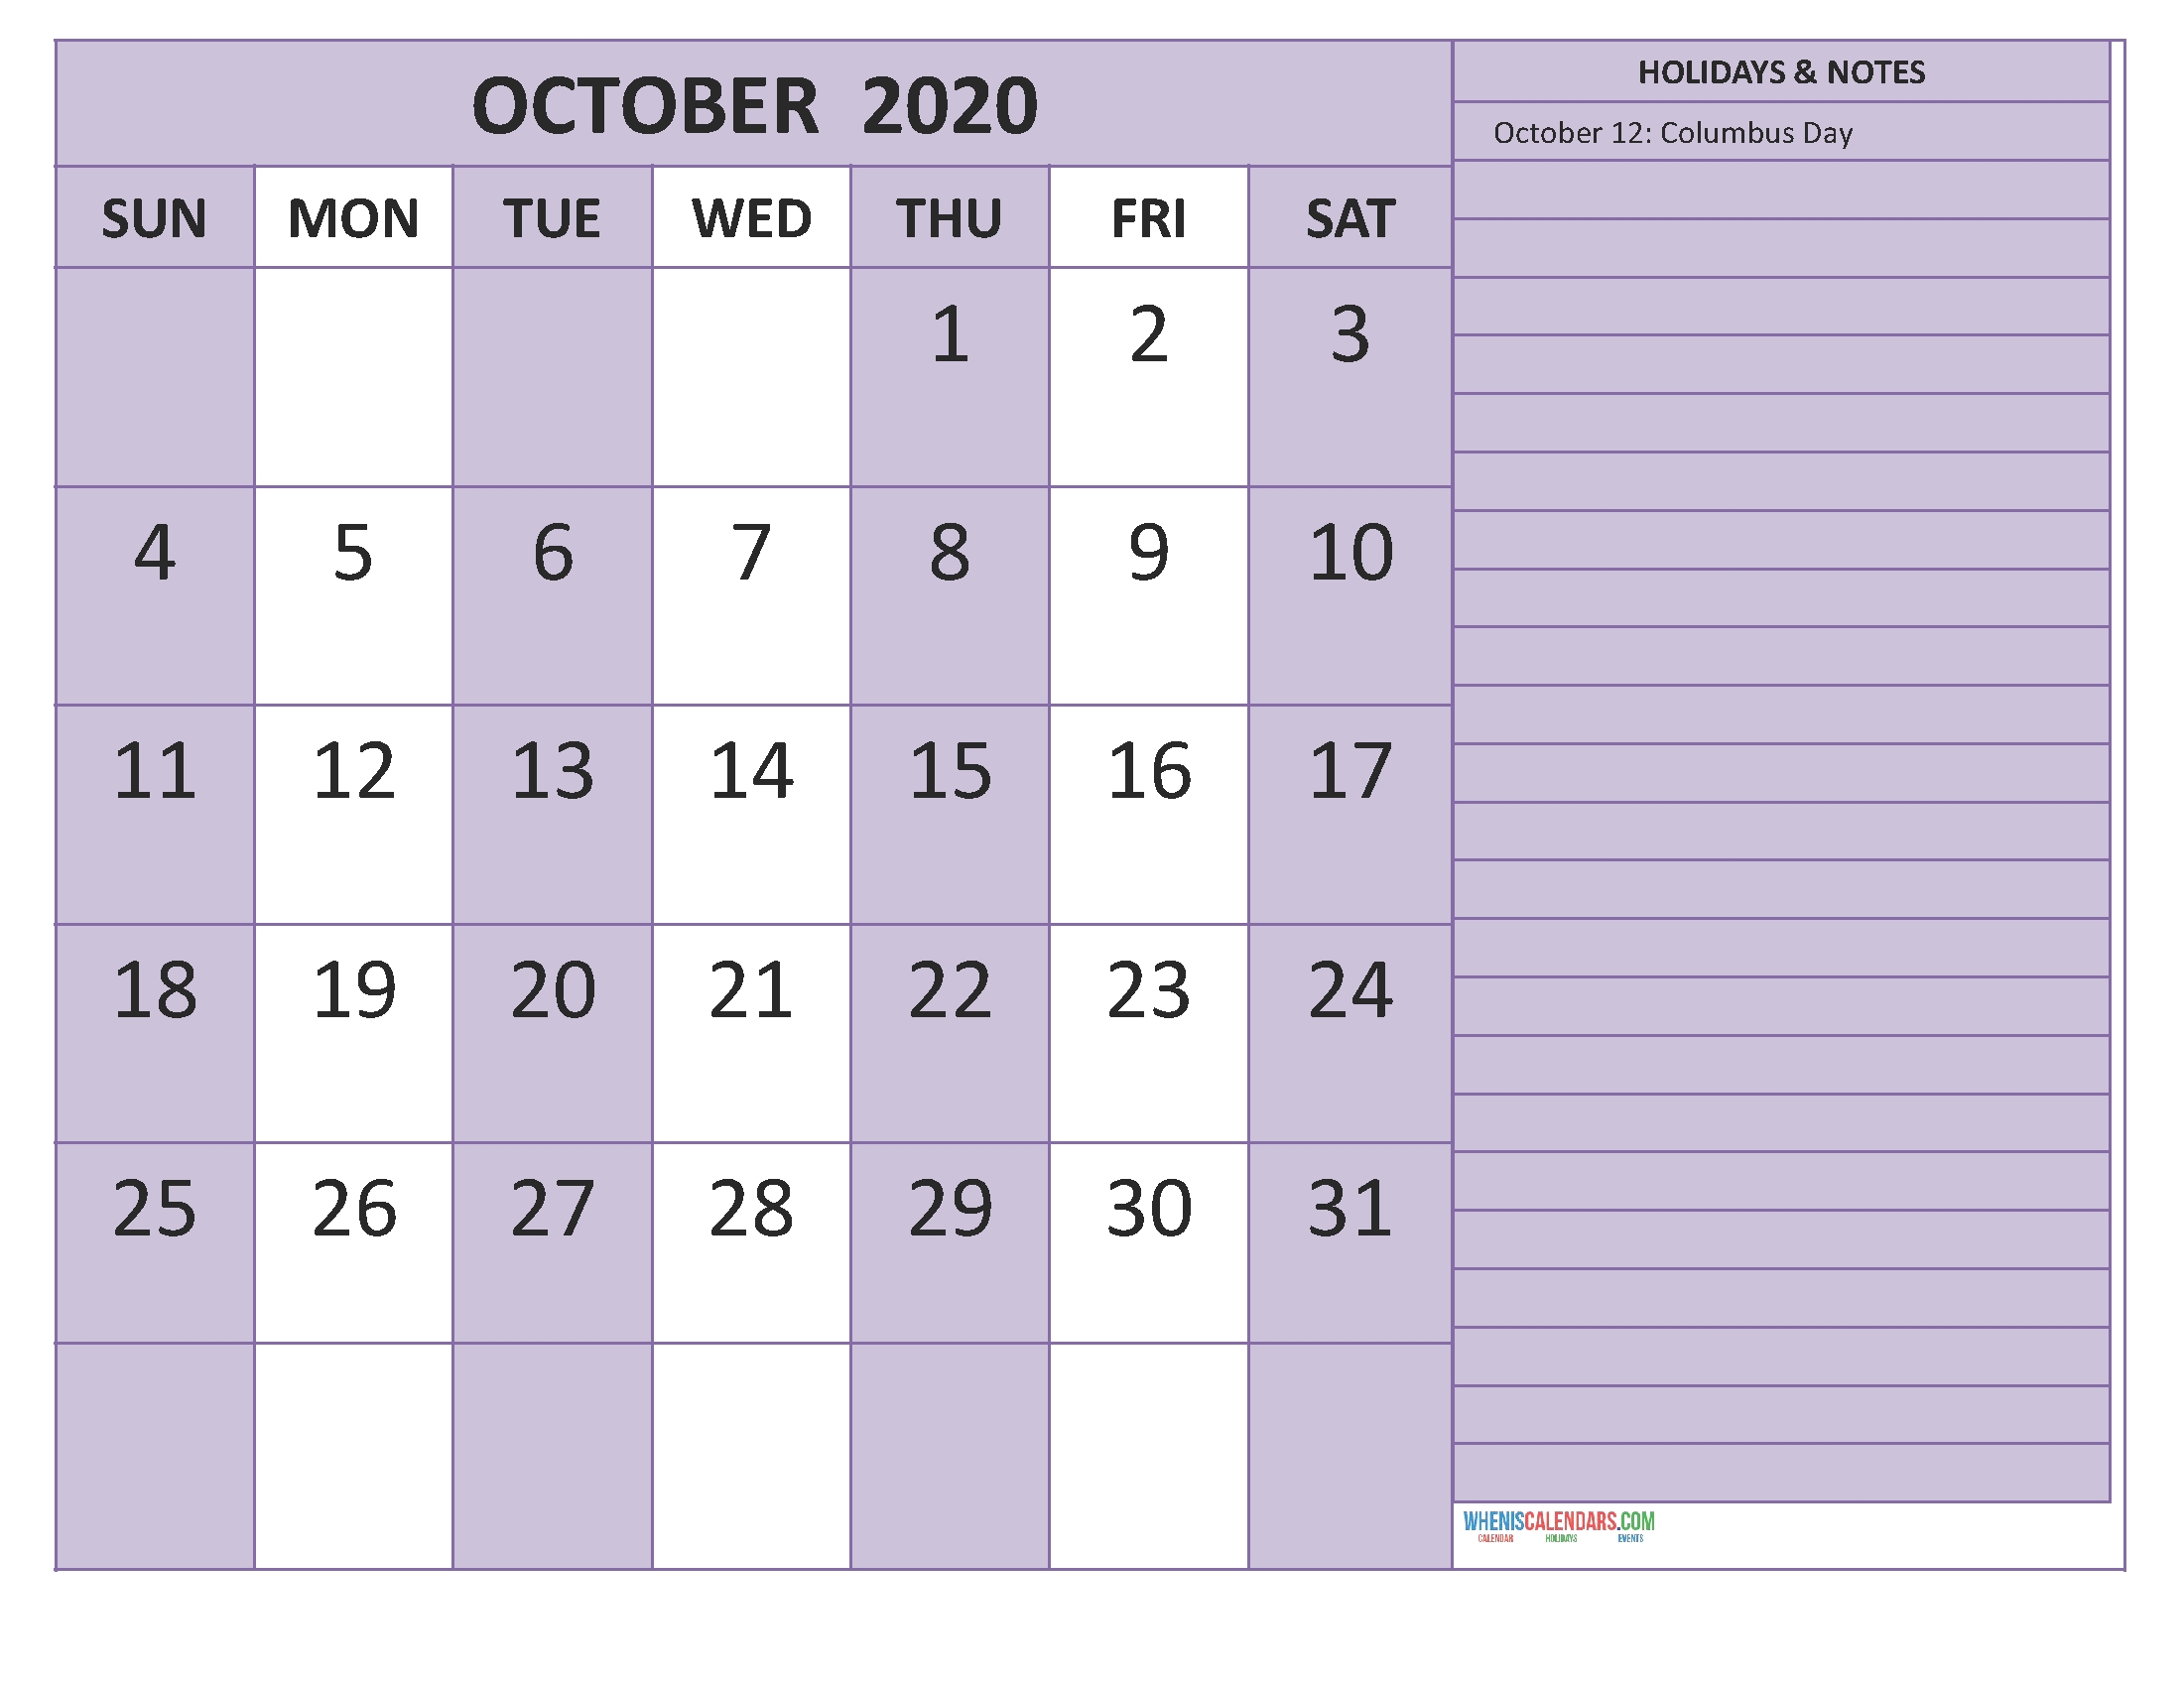 October 2020 Calendar With Holidays Free Printable By Word-Jewish Holidays In October 2020